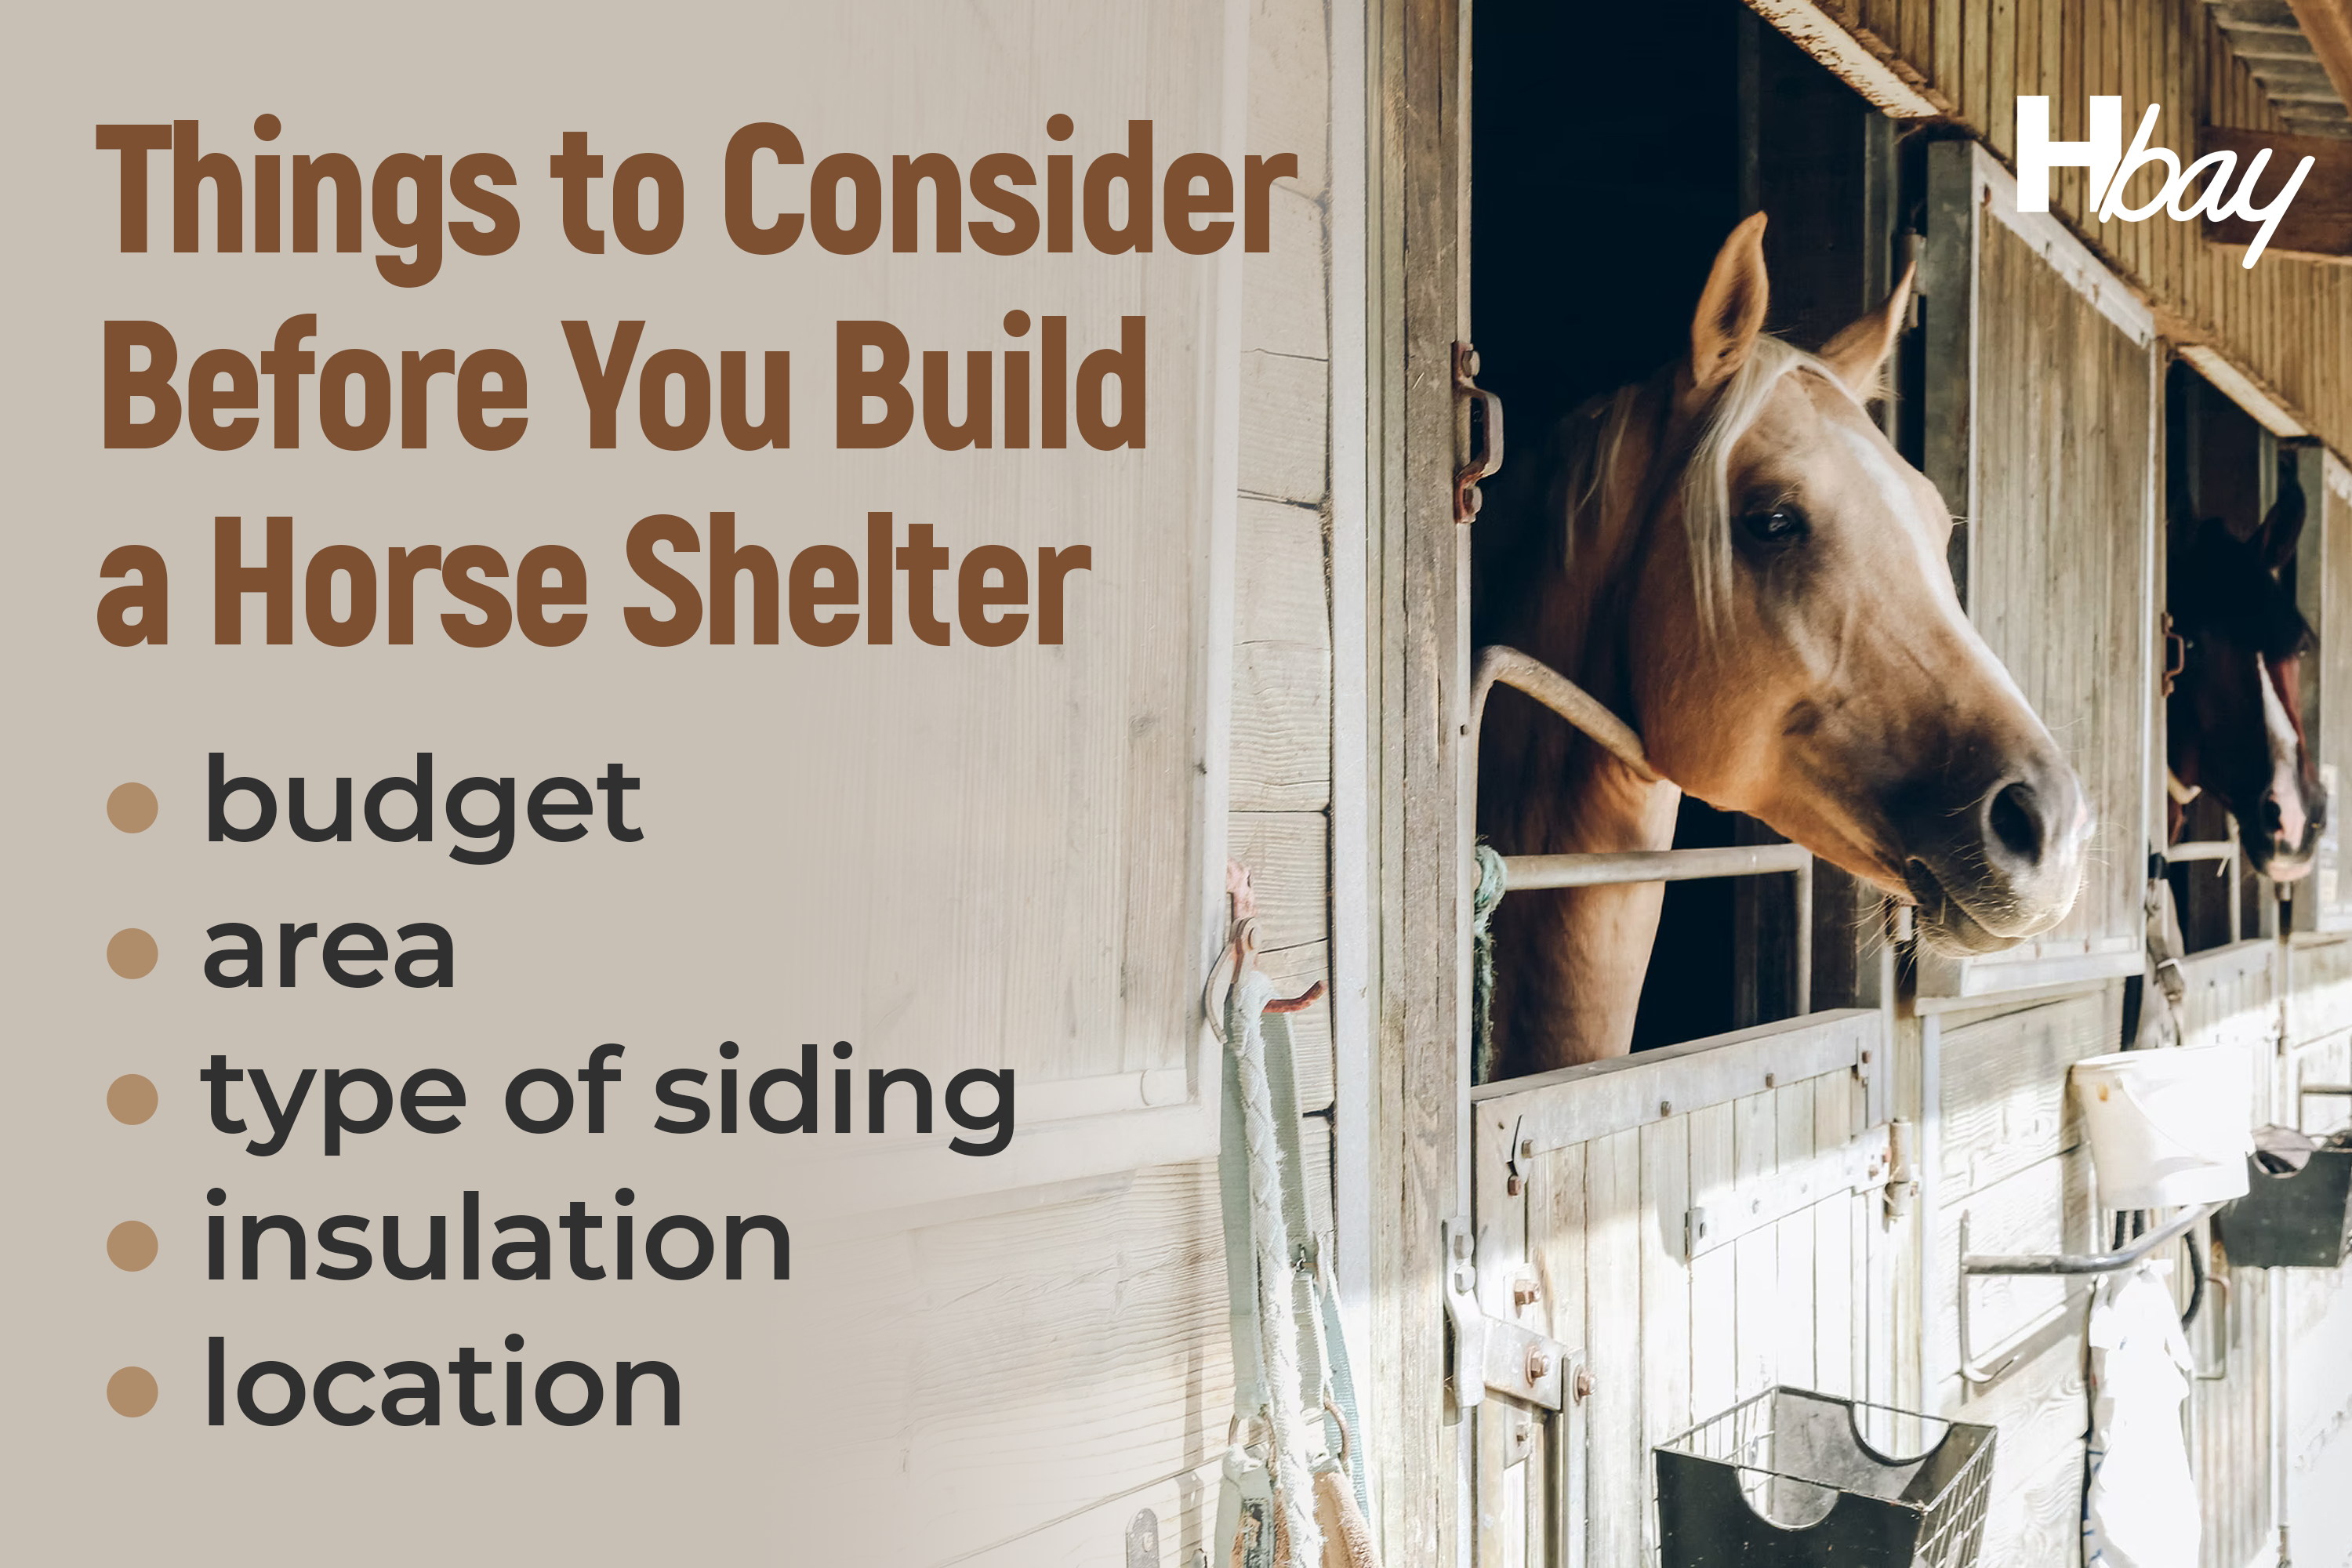 Things to Consider Before You Build a Horse Shelter